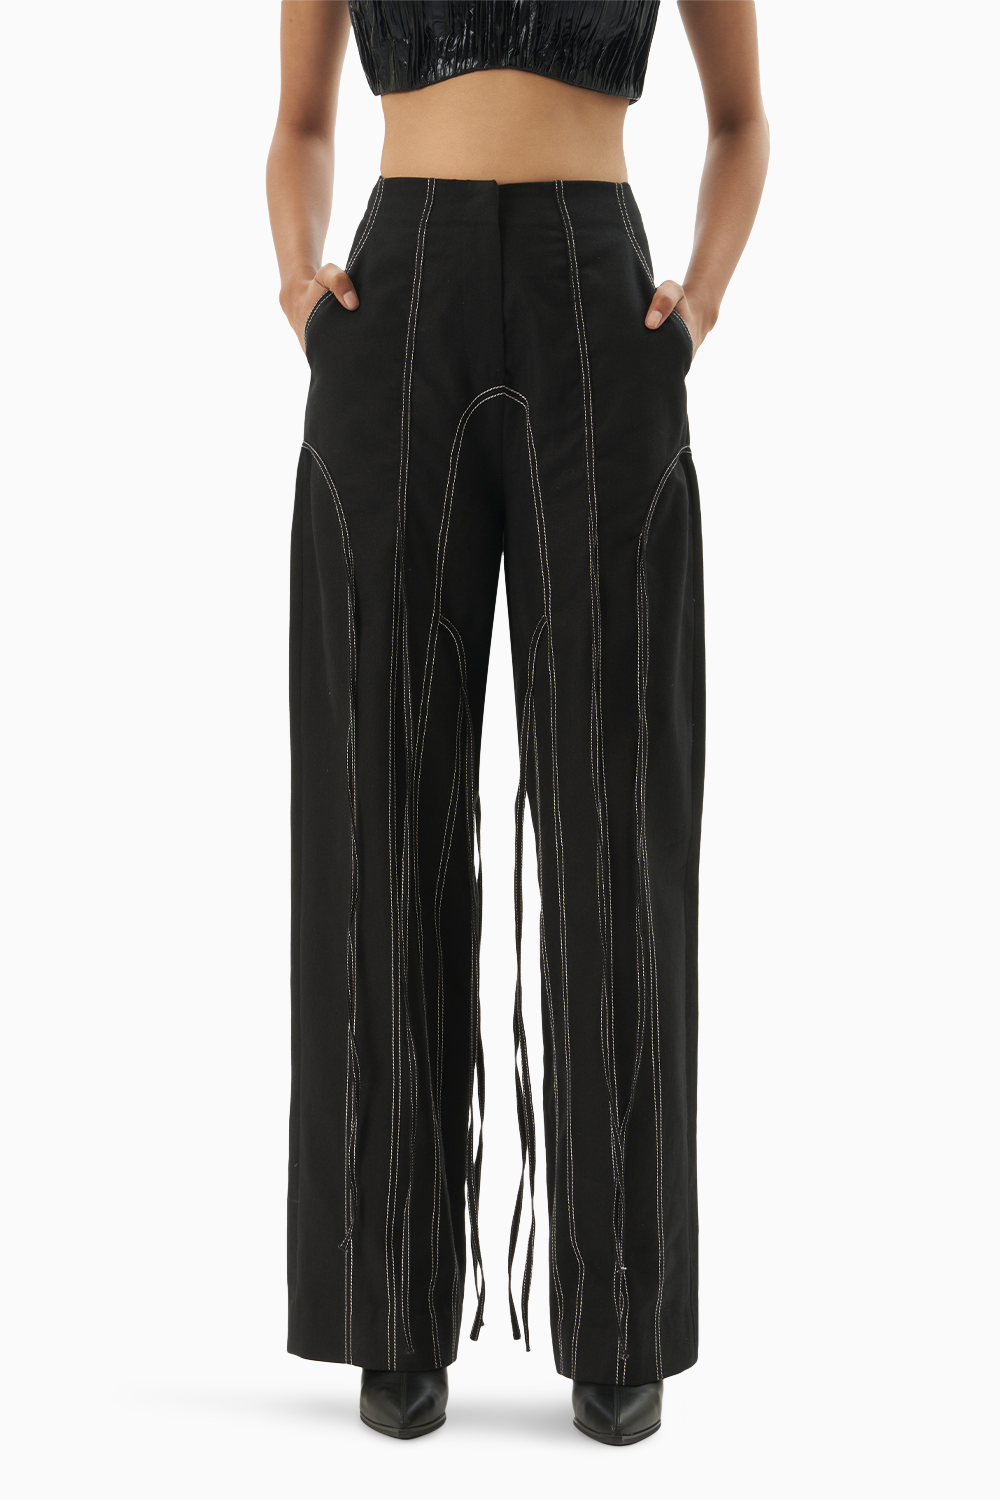 Black Denim Panelled Trouser with Ties